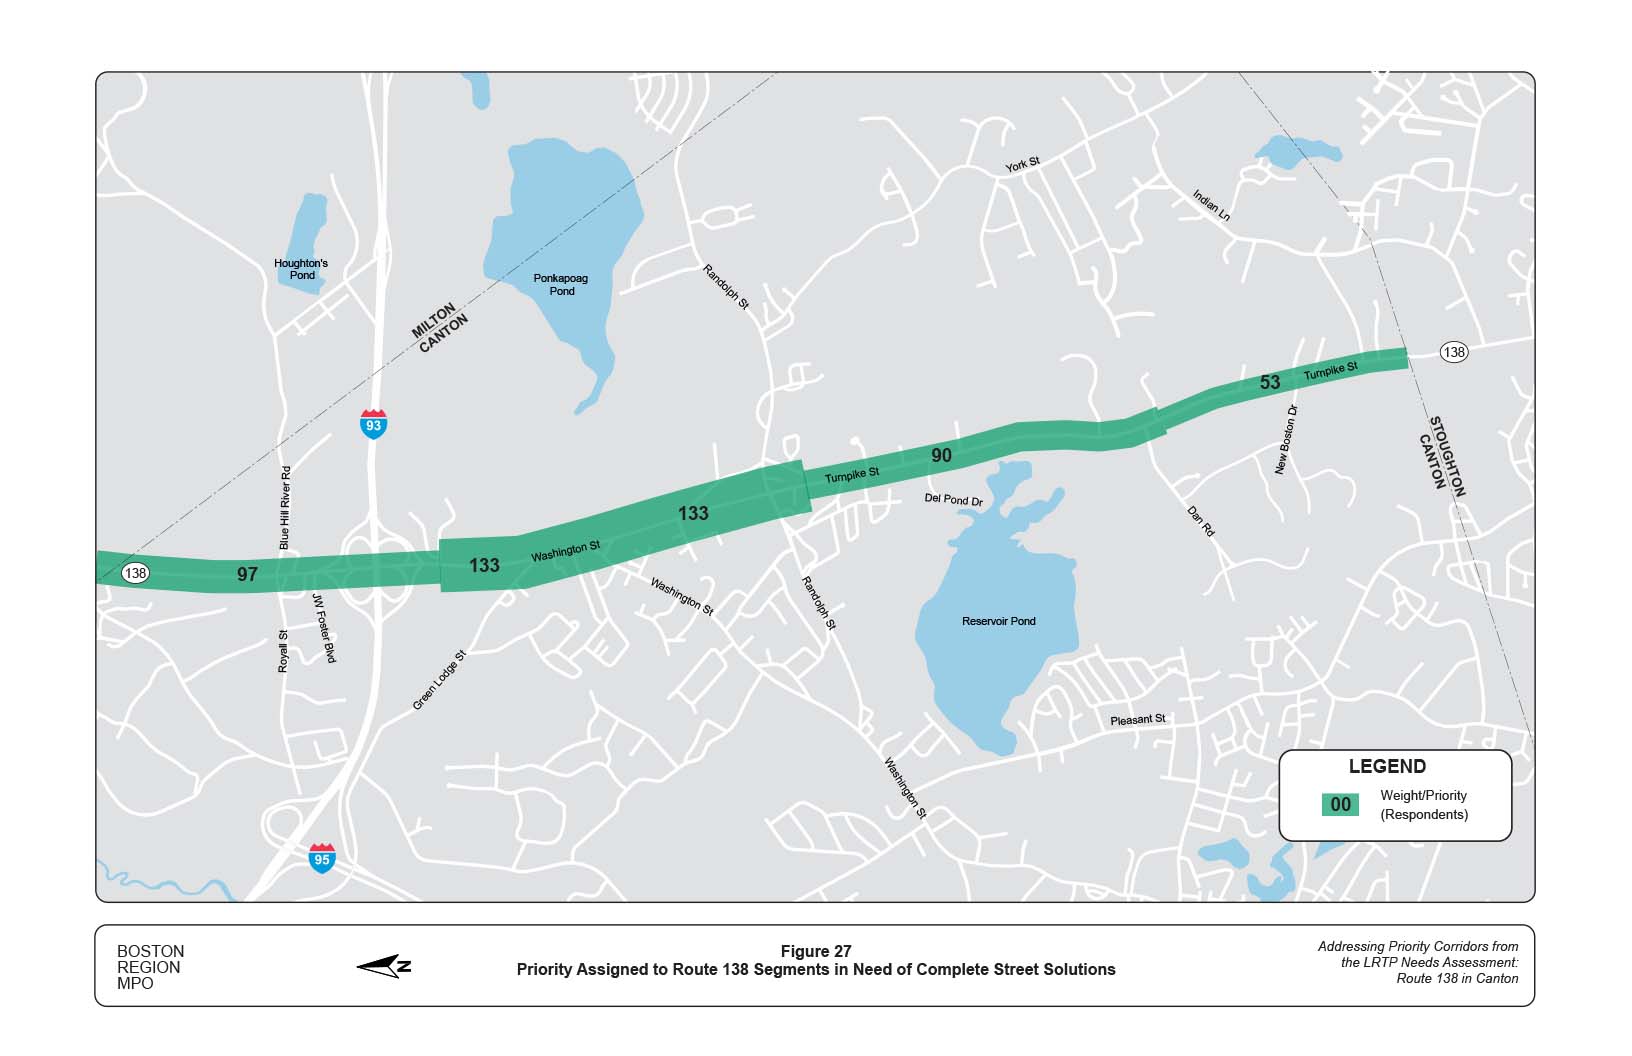 Figure 27 is a map of the study area showing the priority assigned to segments of Route 138 for Complete Streets improvements.